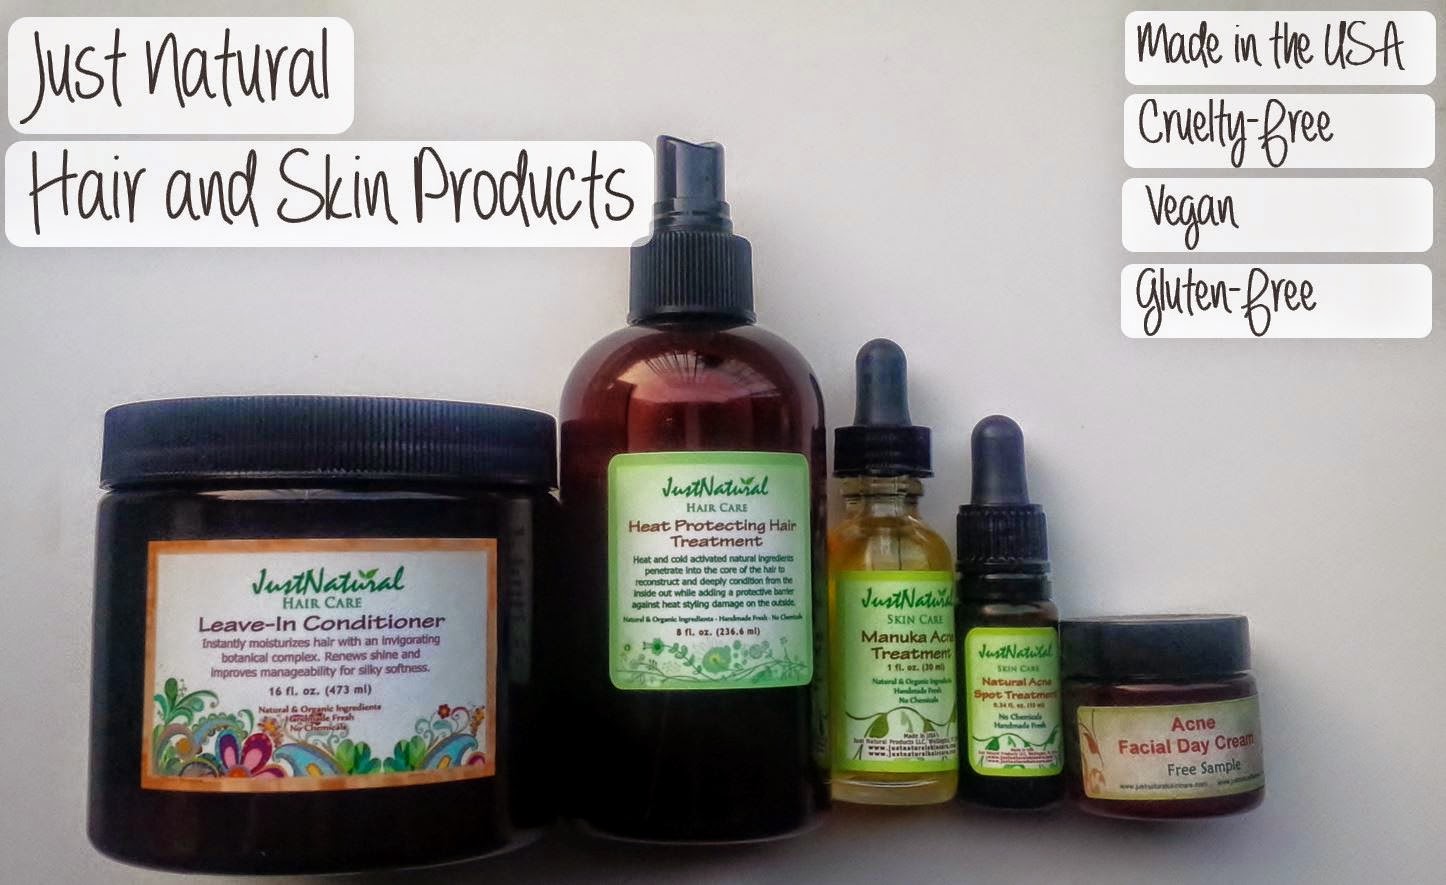 Where can you find reviews on natural skincare products?